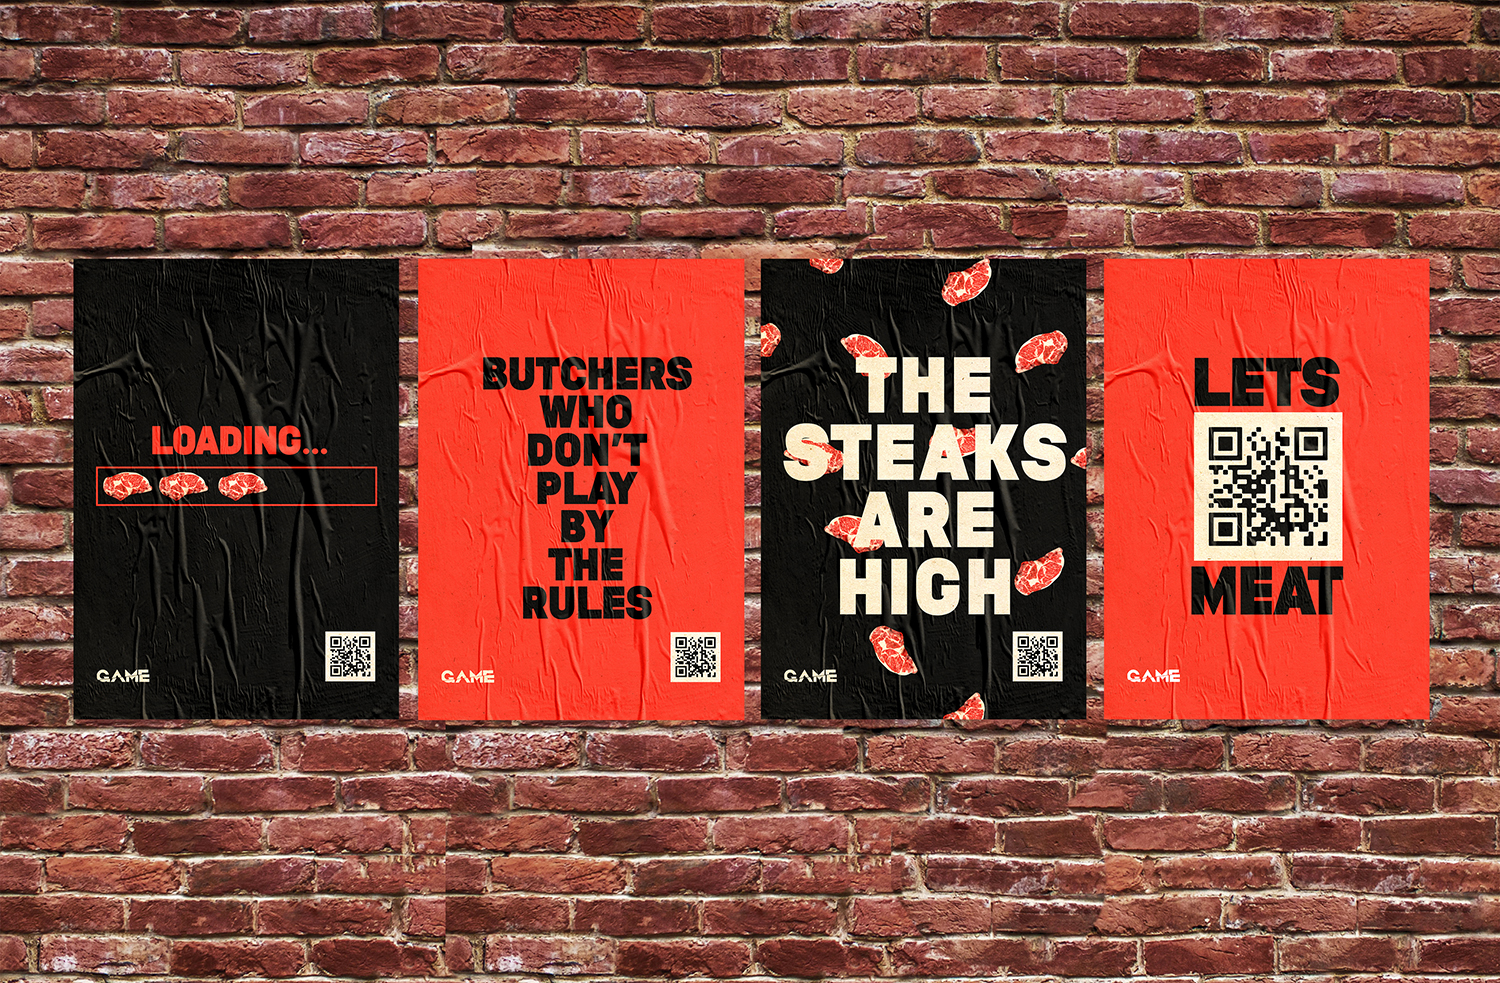 Four mock up posters for 'Game' butchers brand identity promoting the butchers and integrated app by Estelle Naderi. Posters are red and black with large text.